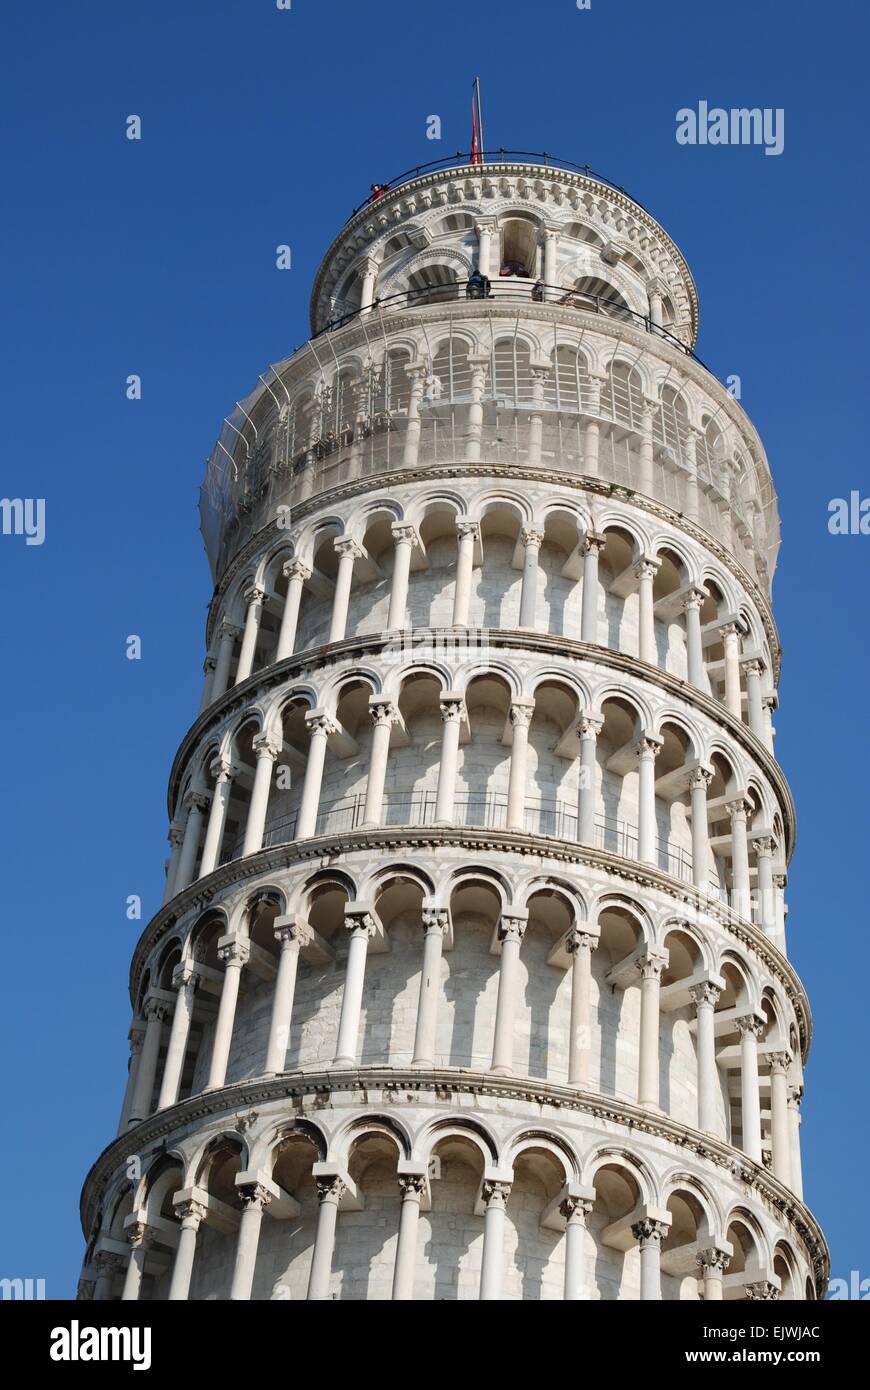 Leaning Tower of Pisa, Italy. Stock Photo